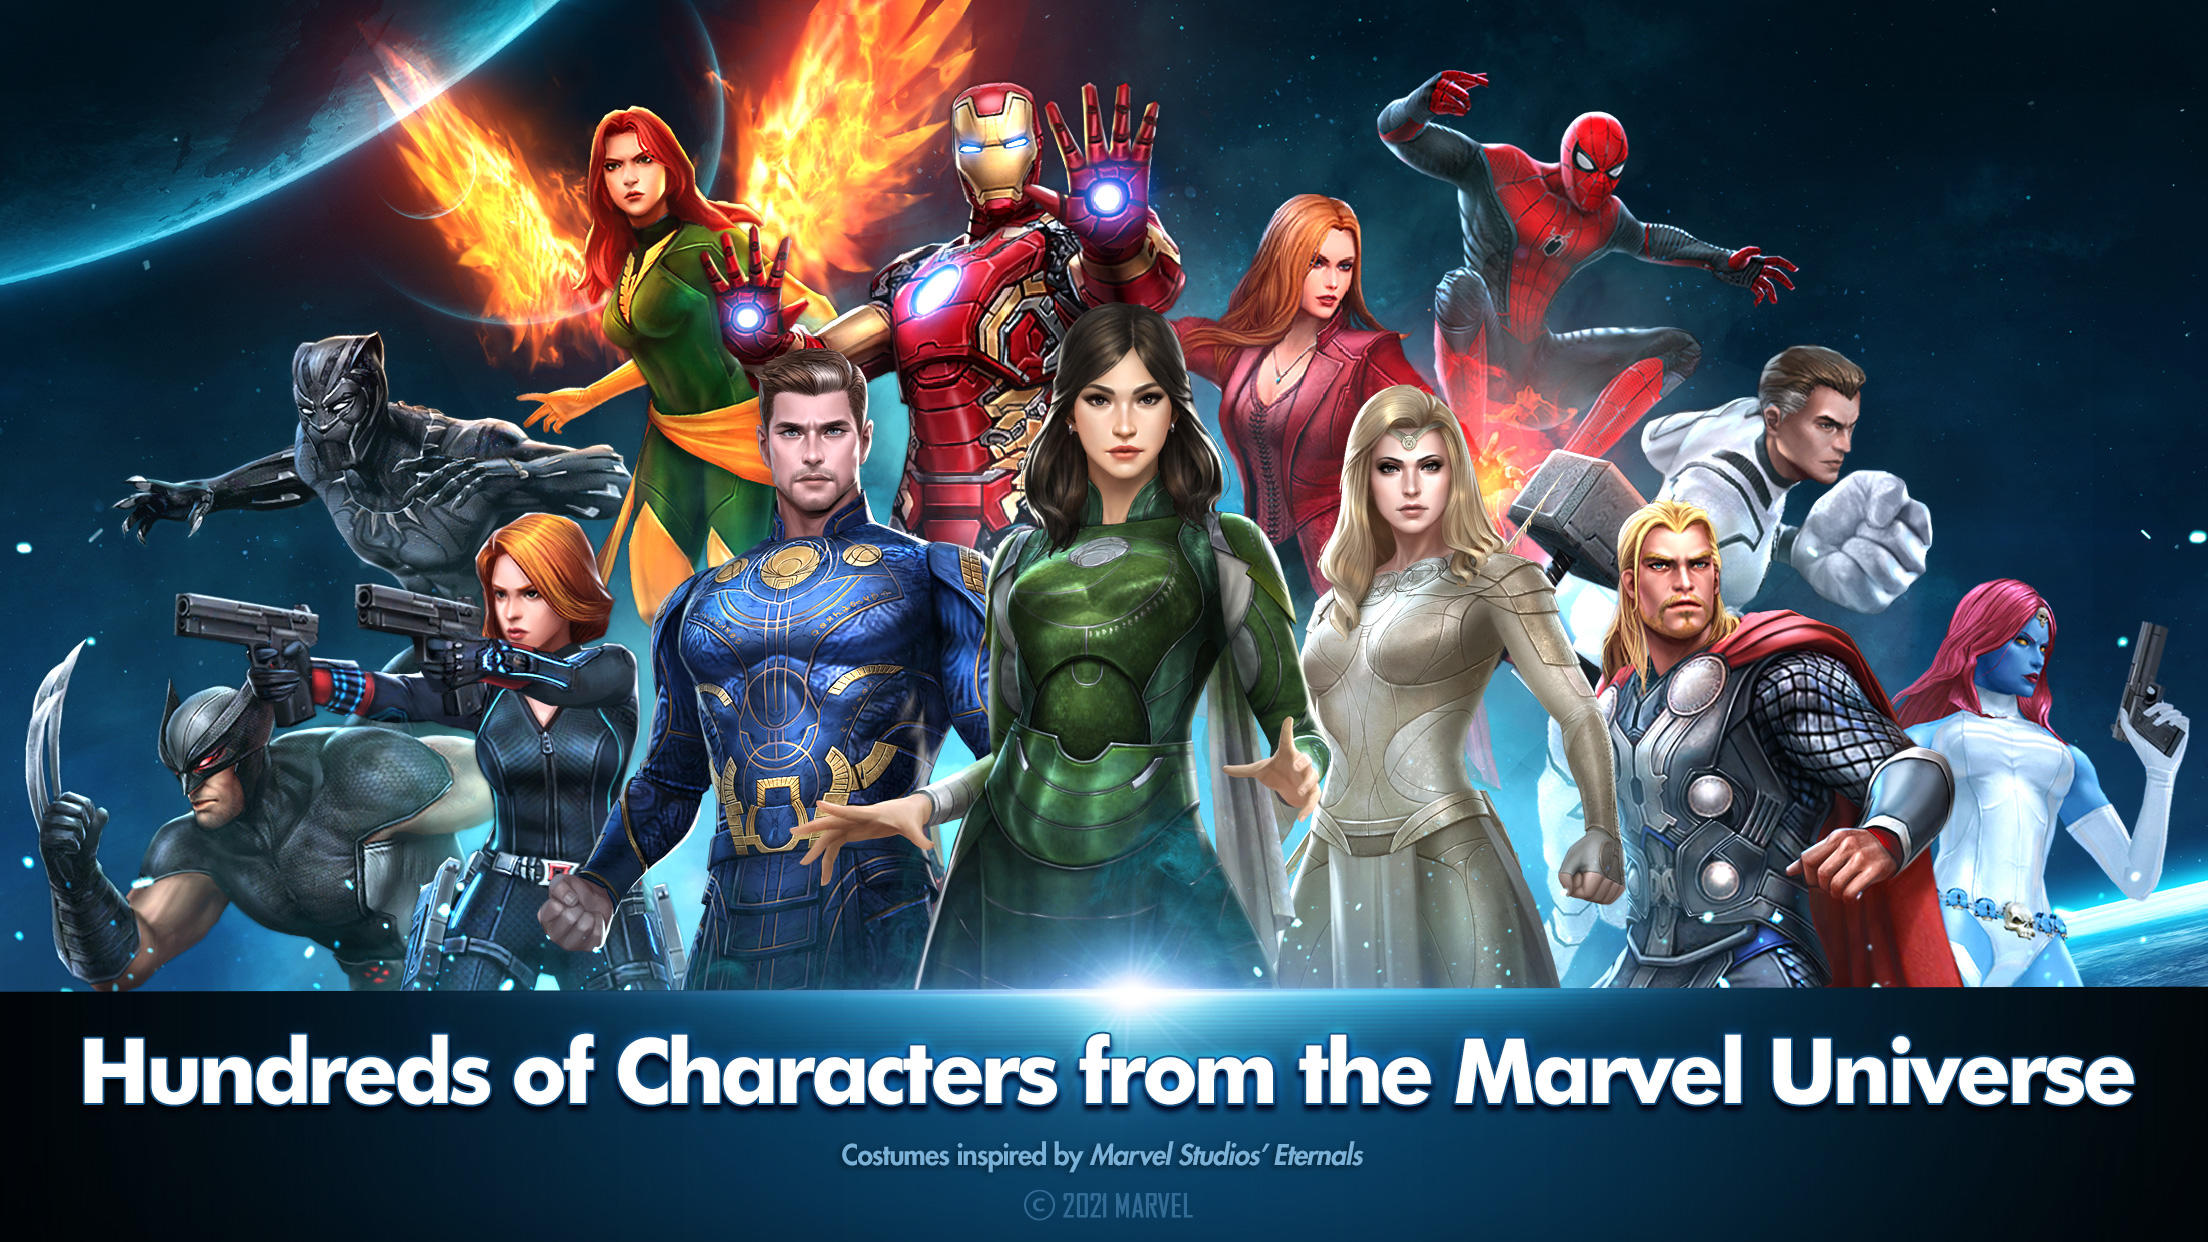 Clash of Avengers -  - Android & iOS MODs, Mobile Games & Apps